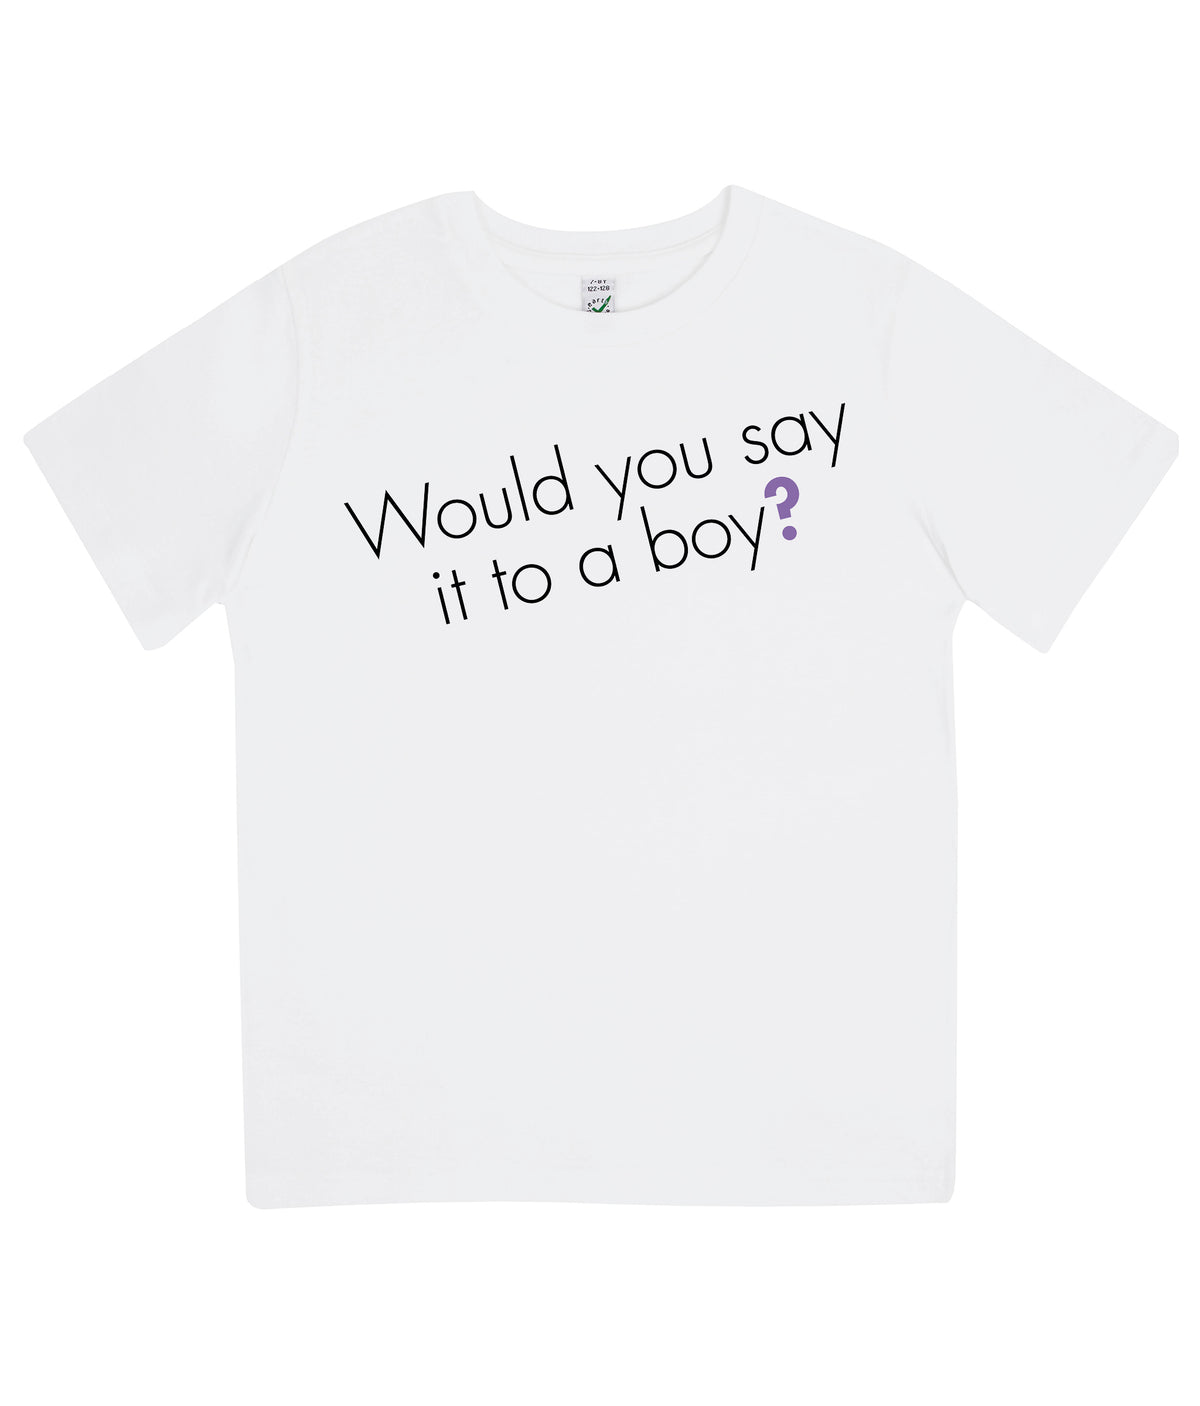 Would You Say It To A Boy Kids Organic Feminist T Shirt White